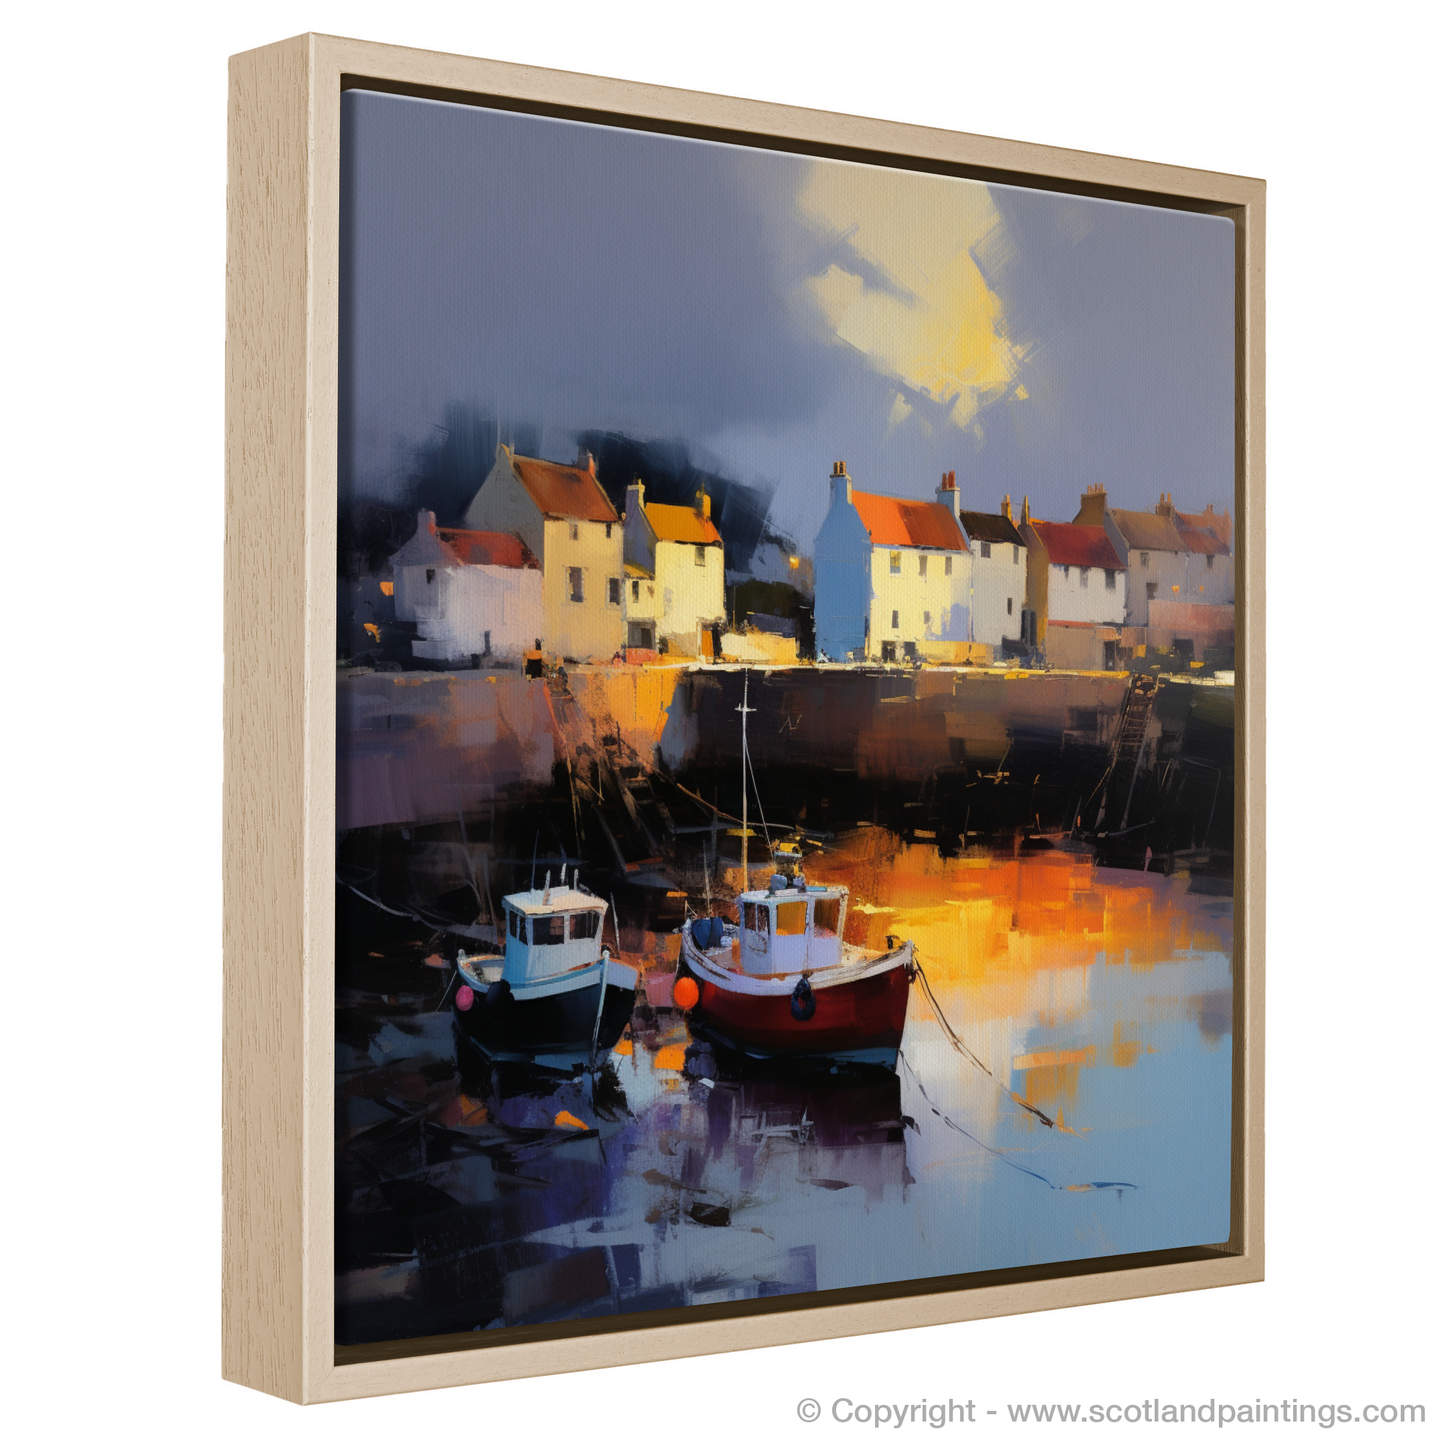 Crail Harbour at Dusk: An Expressionist Ode to Scottish Coastal Serenity